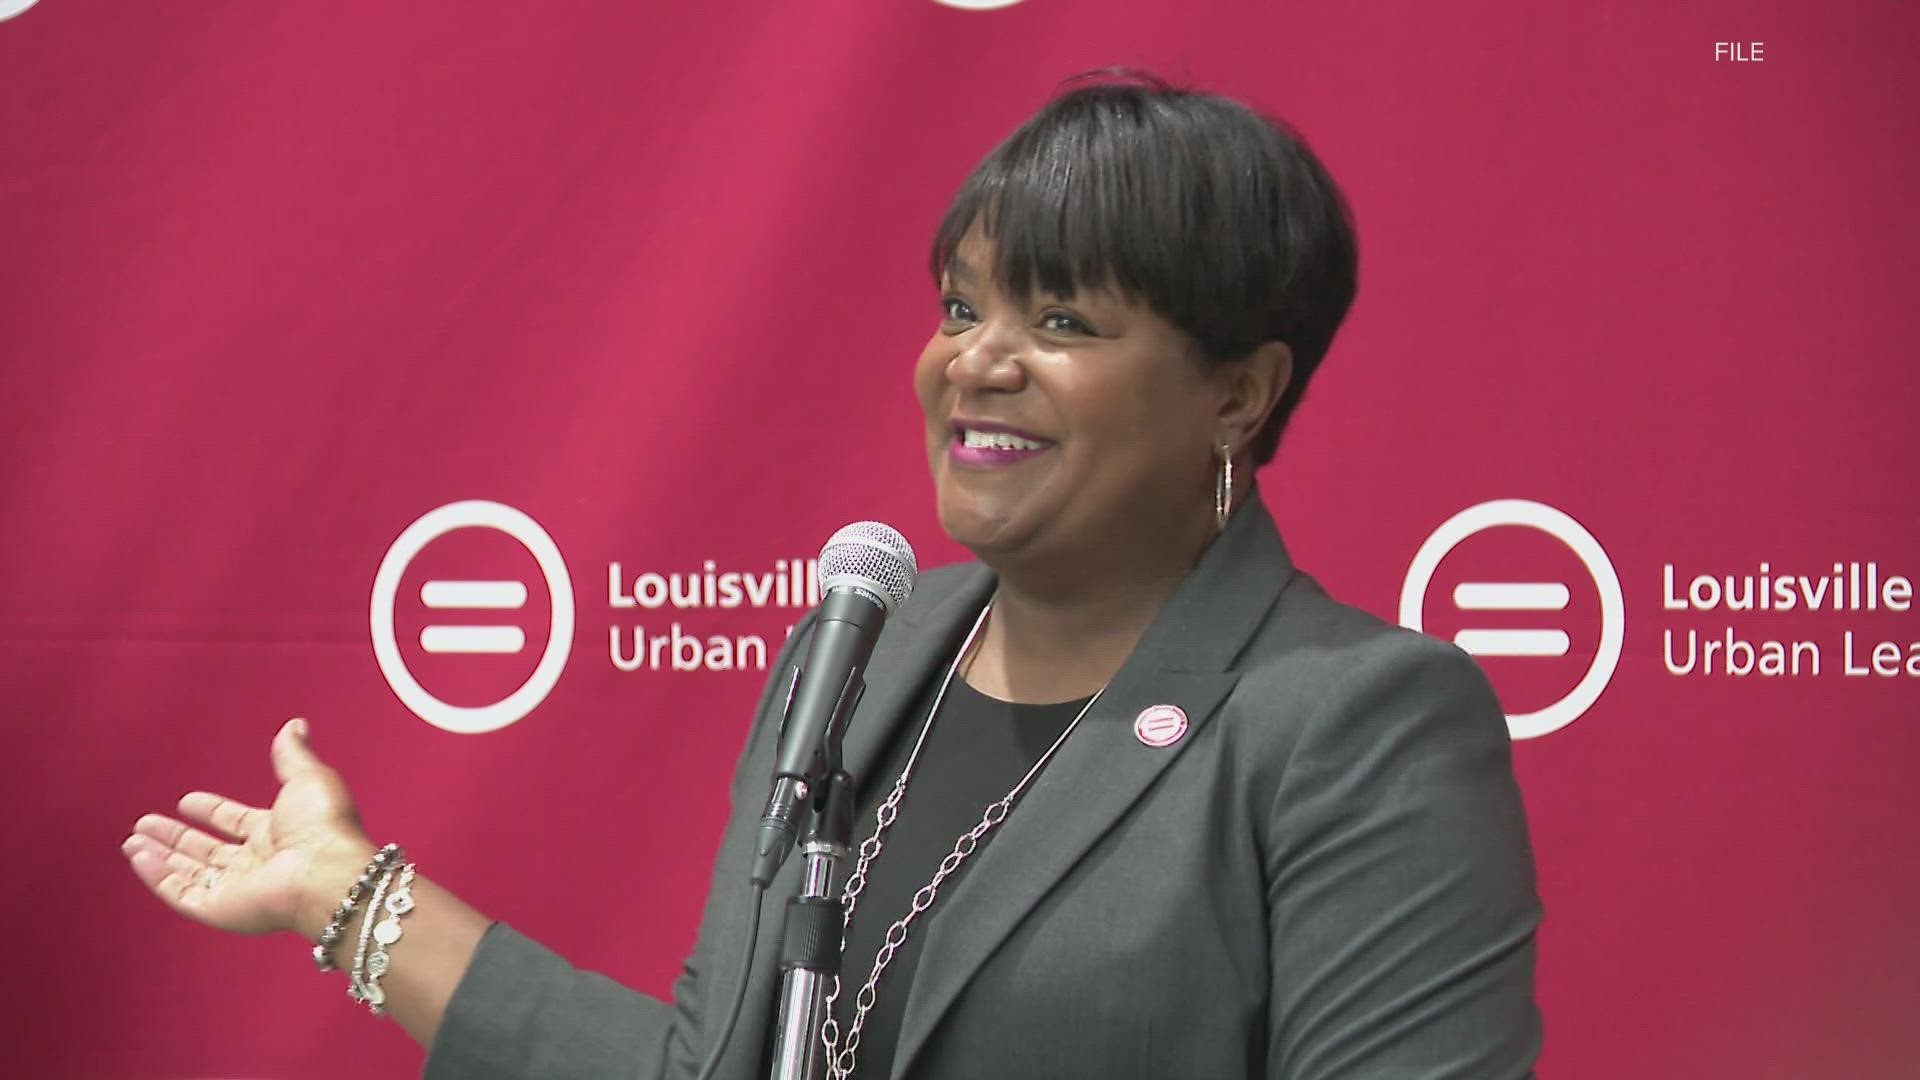 After nearly 7 years, Sadiqa Reynolds will step down as CEO of the Louisville Urban League this fall.